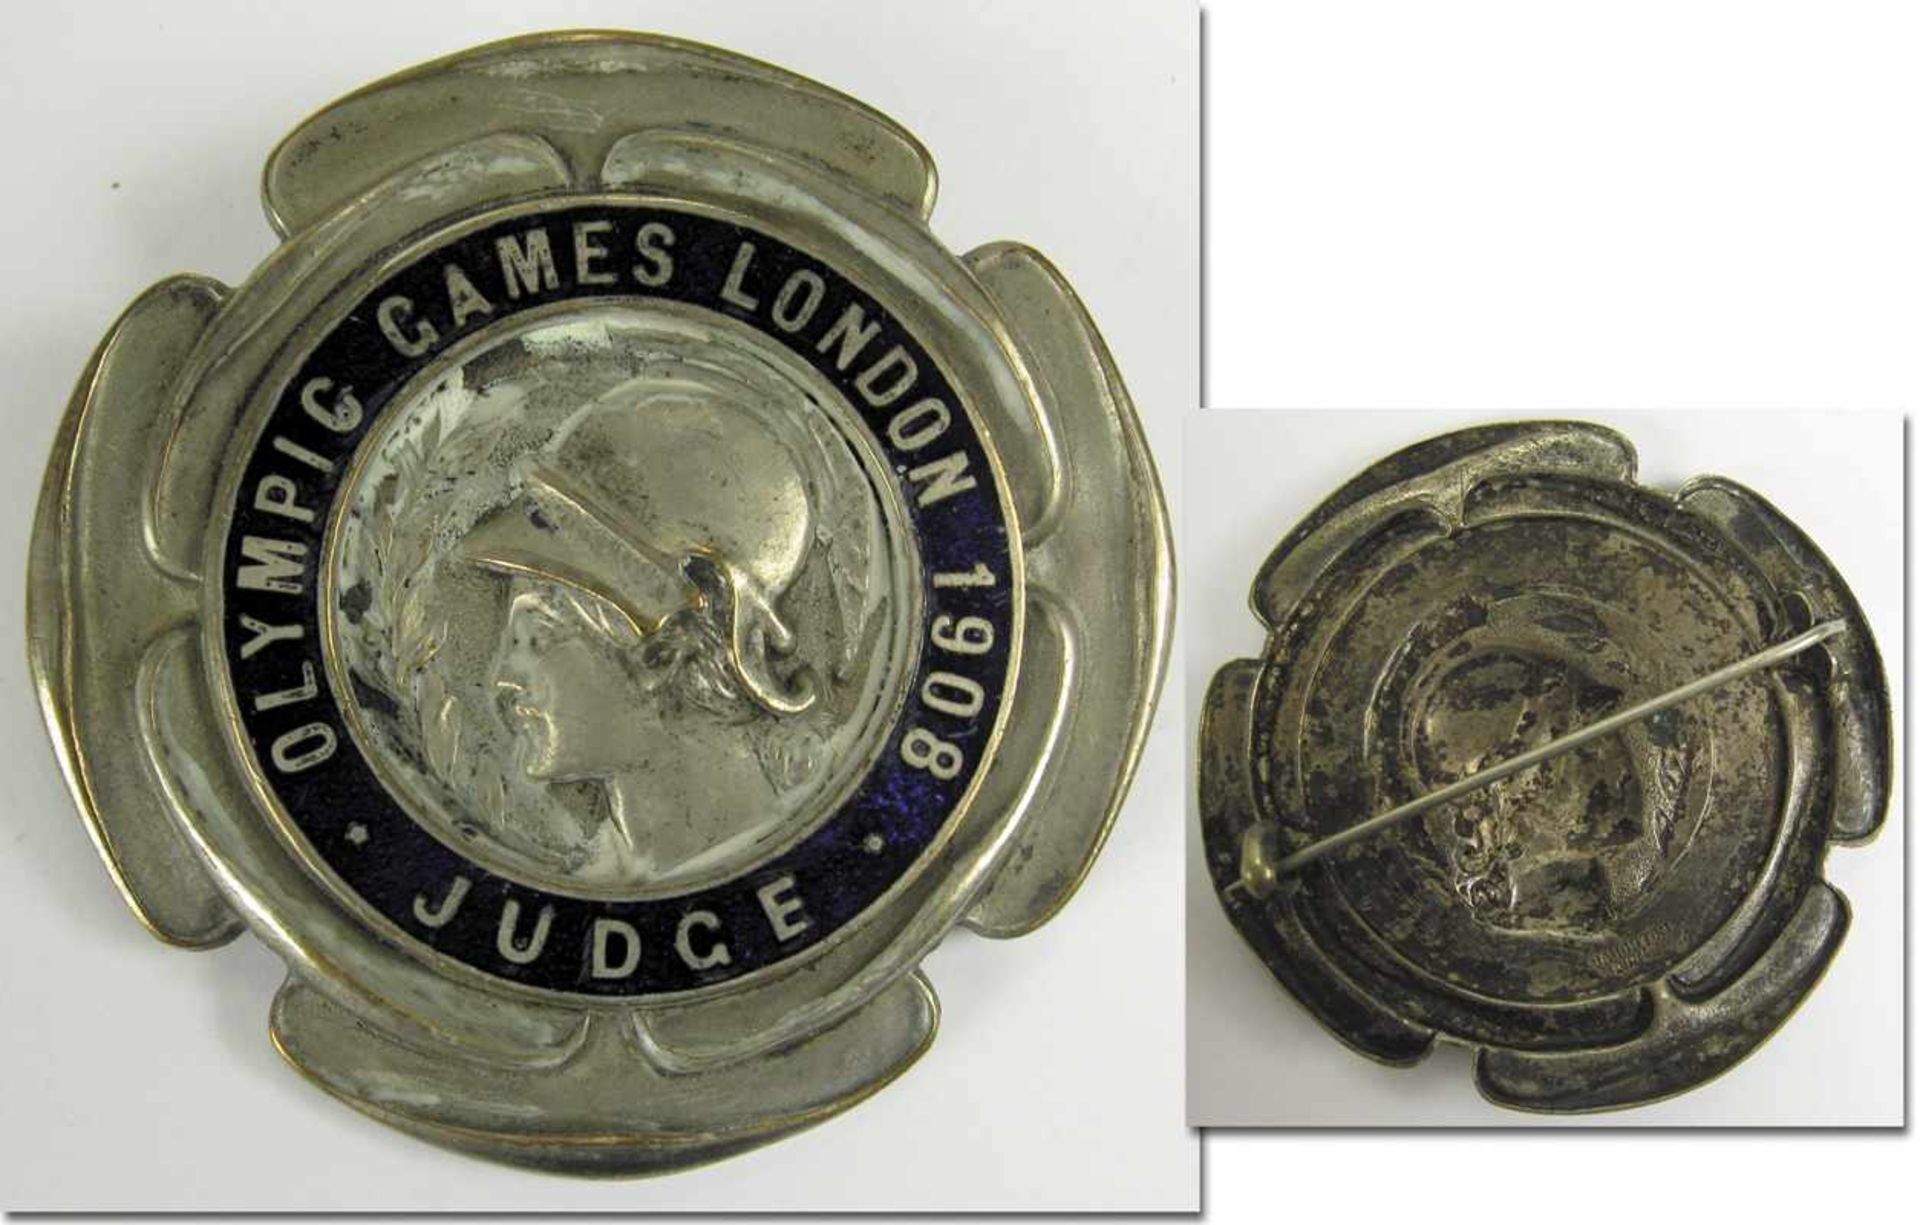 Olympic Games London 1908 Participation badge - Large official participantion badge for the